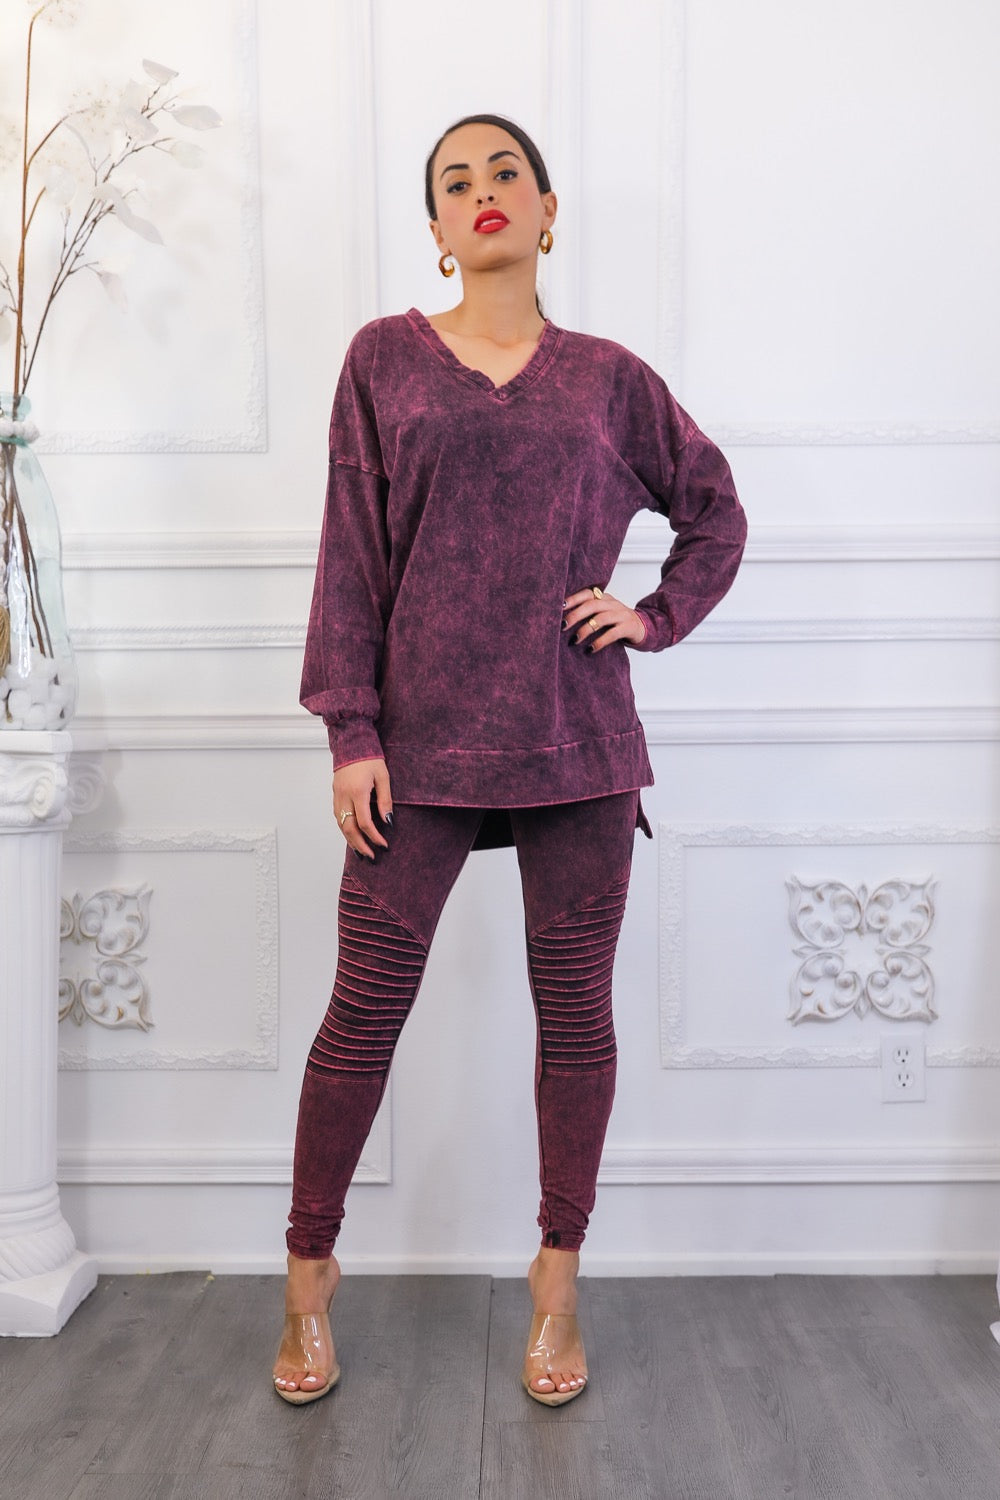 Mineral Wash Long Sleeves Top and Motto Legging Set